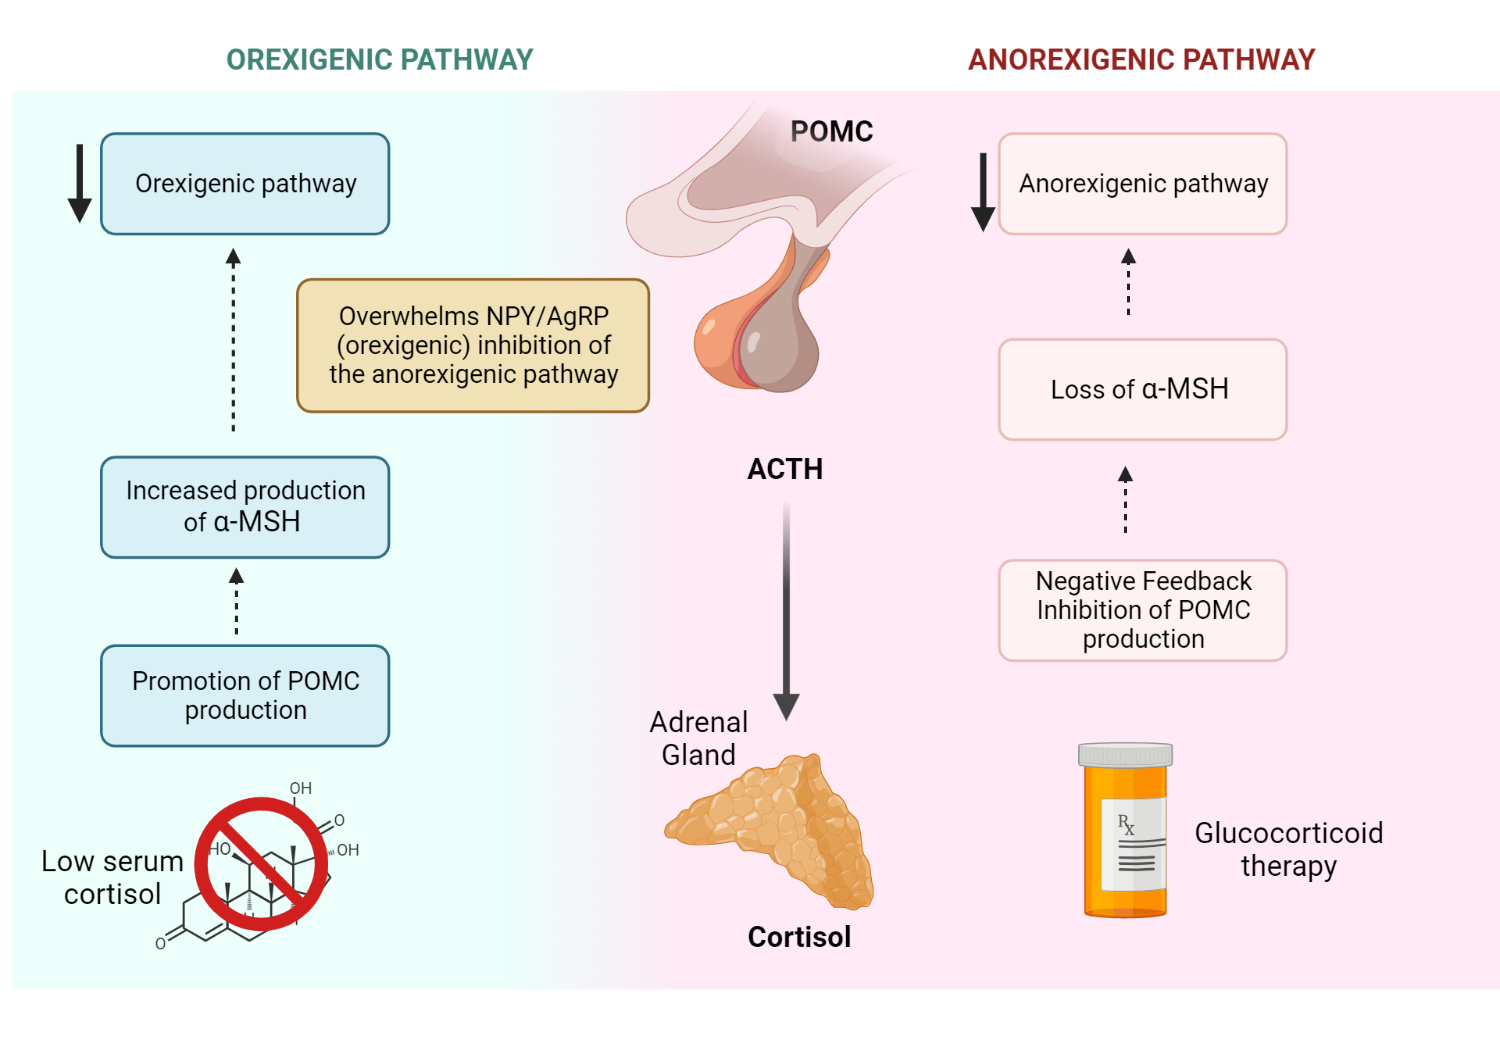 Figure 2.0 Comparison of the effects of exogenous steroids and Addison’s disease on the anorexigenic and orexigenic pathways, respectively